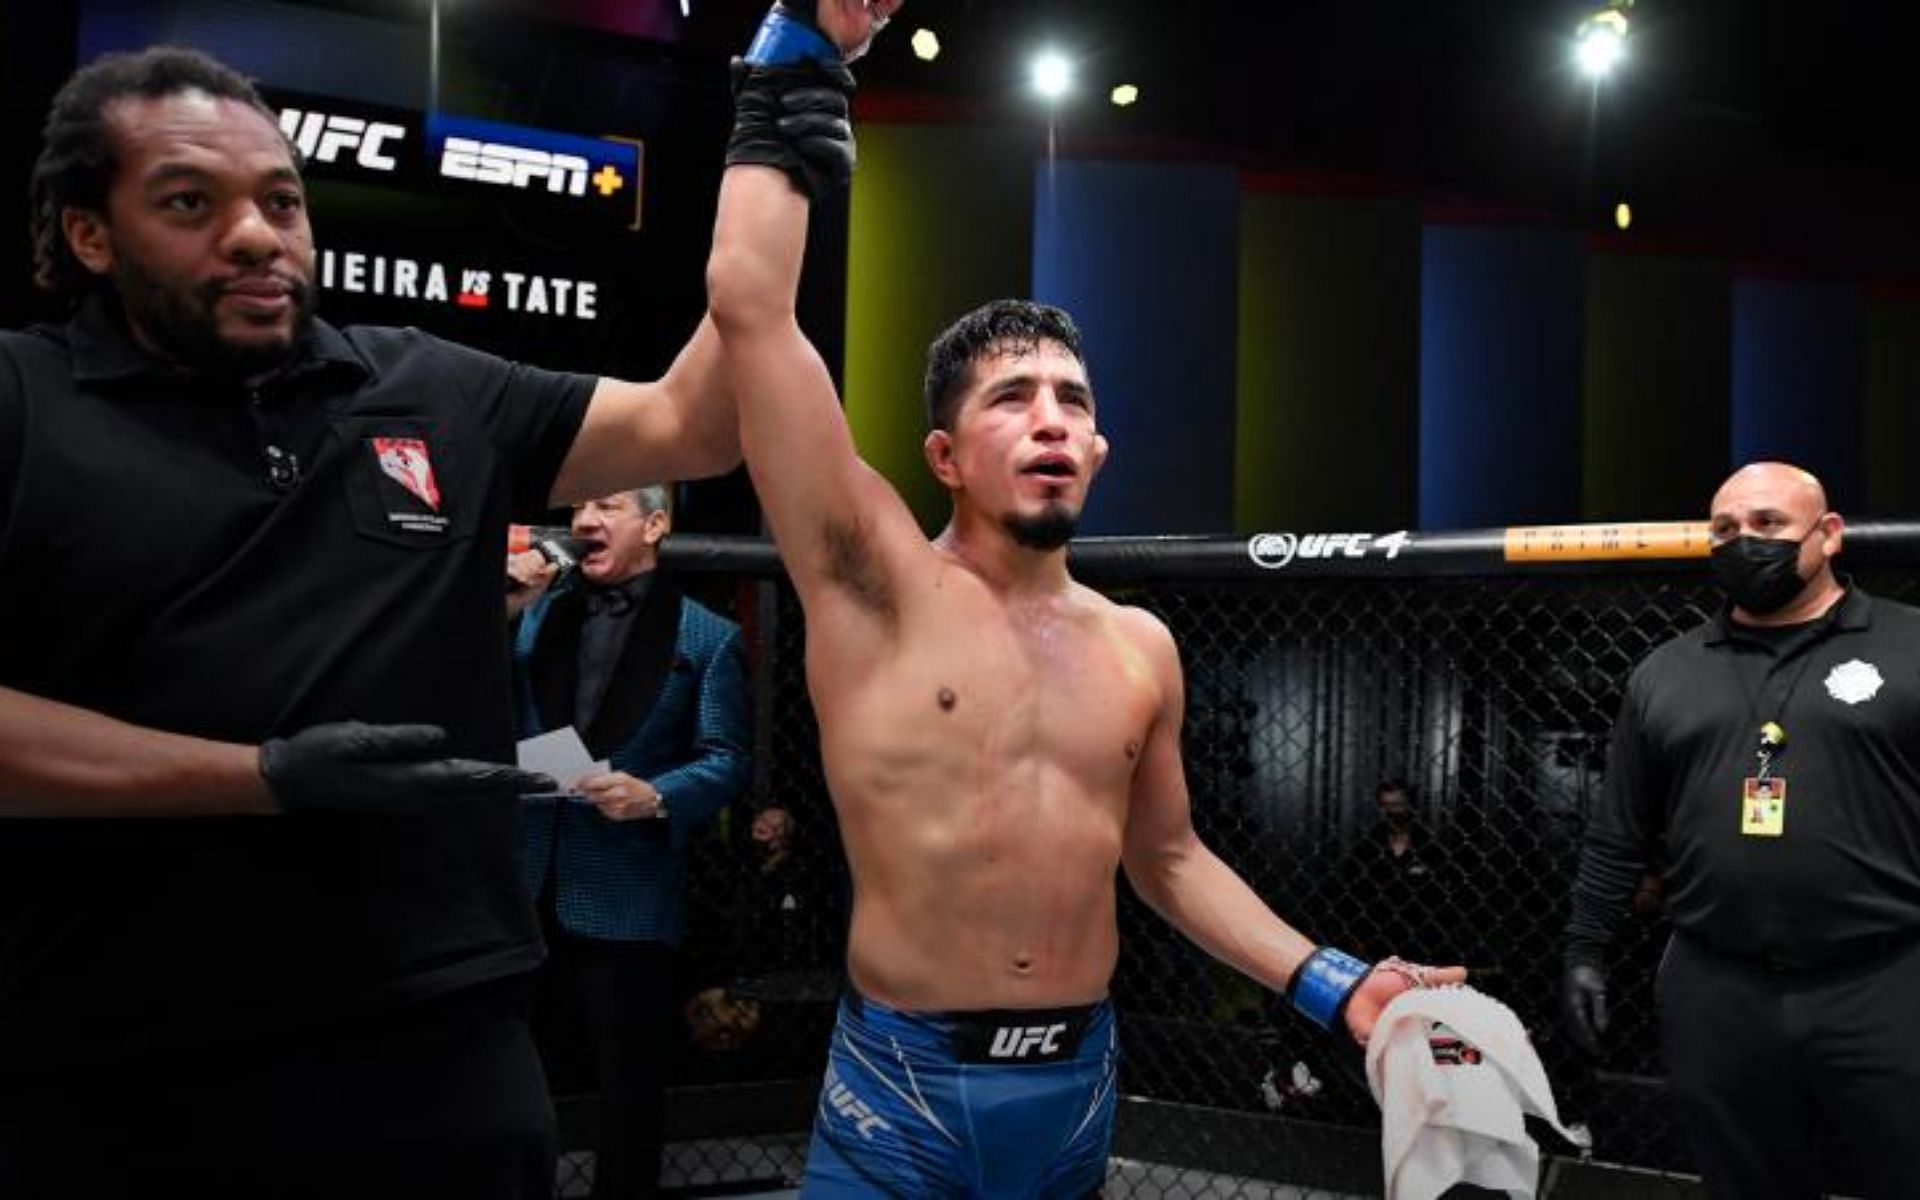 After his latest win, who should be next for Adrian Yanez?